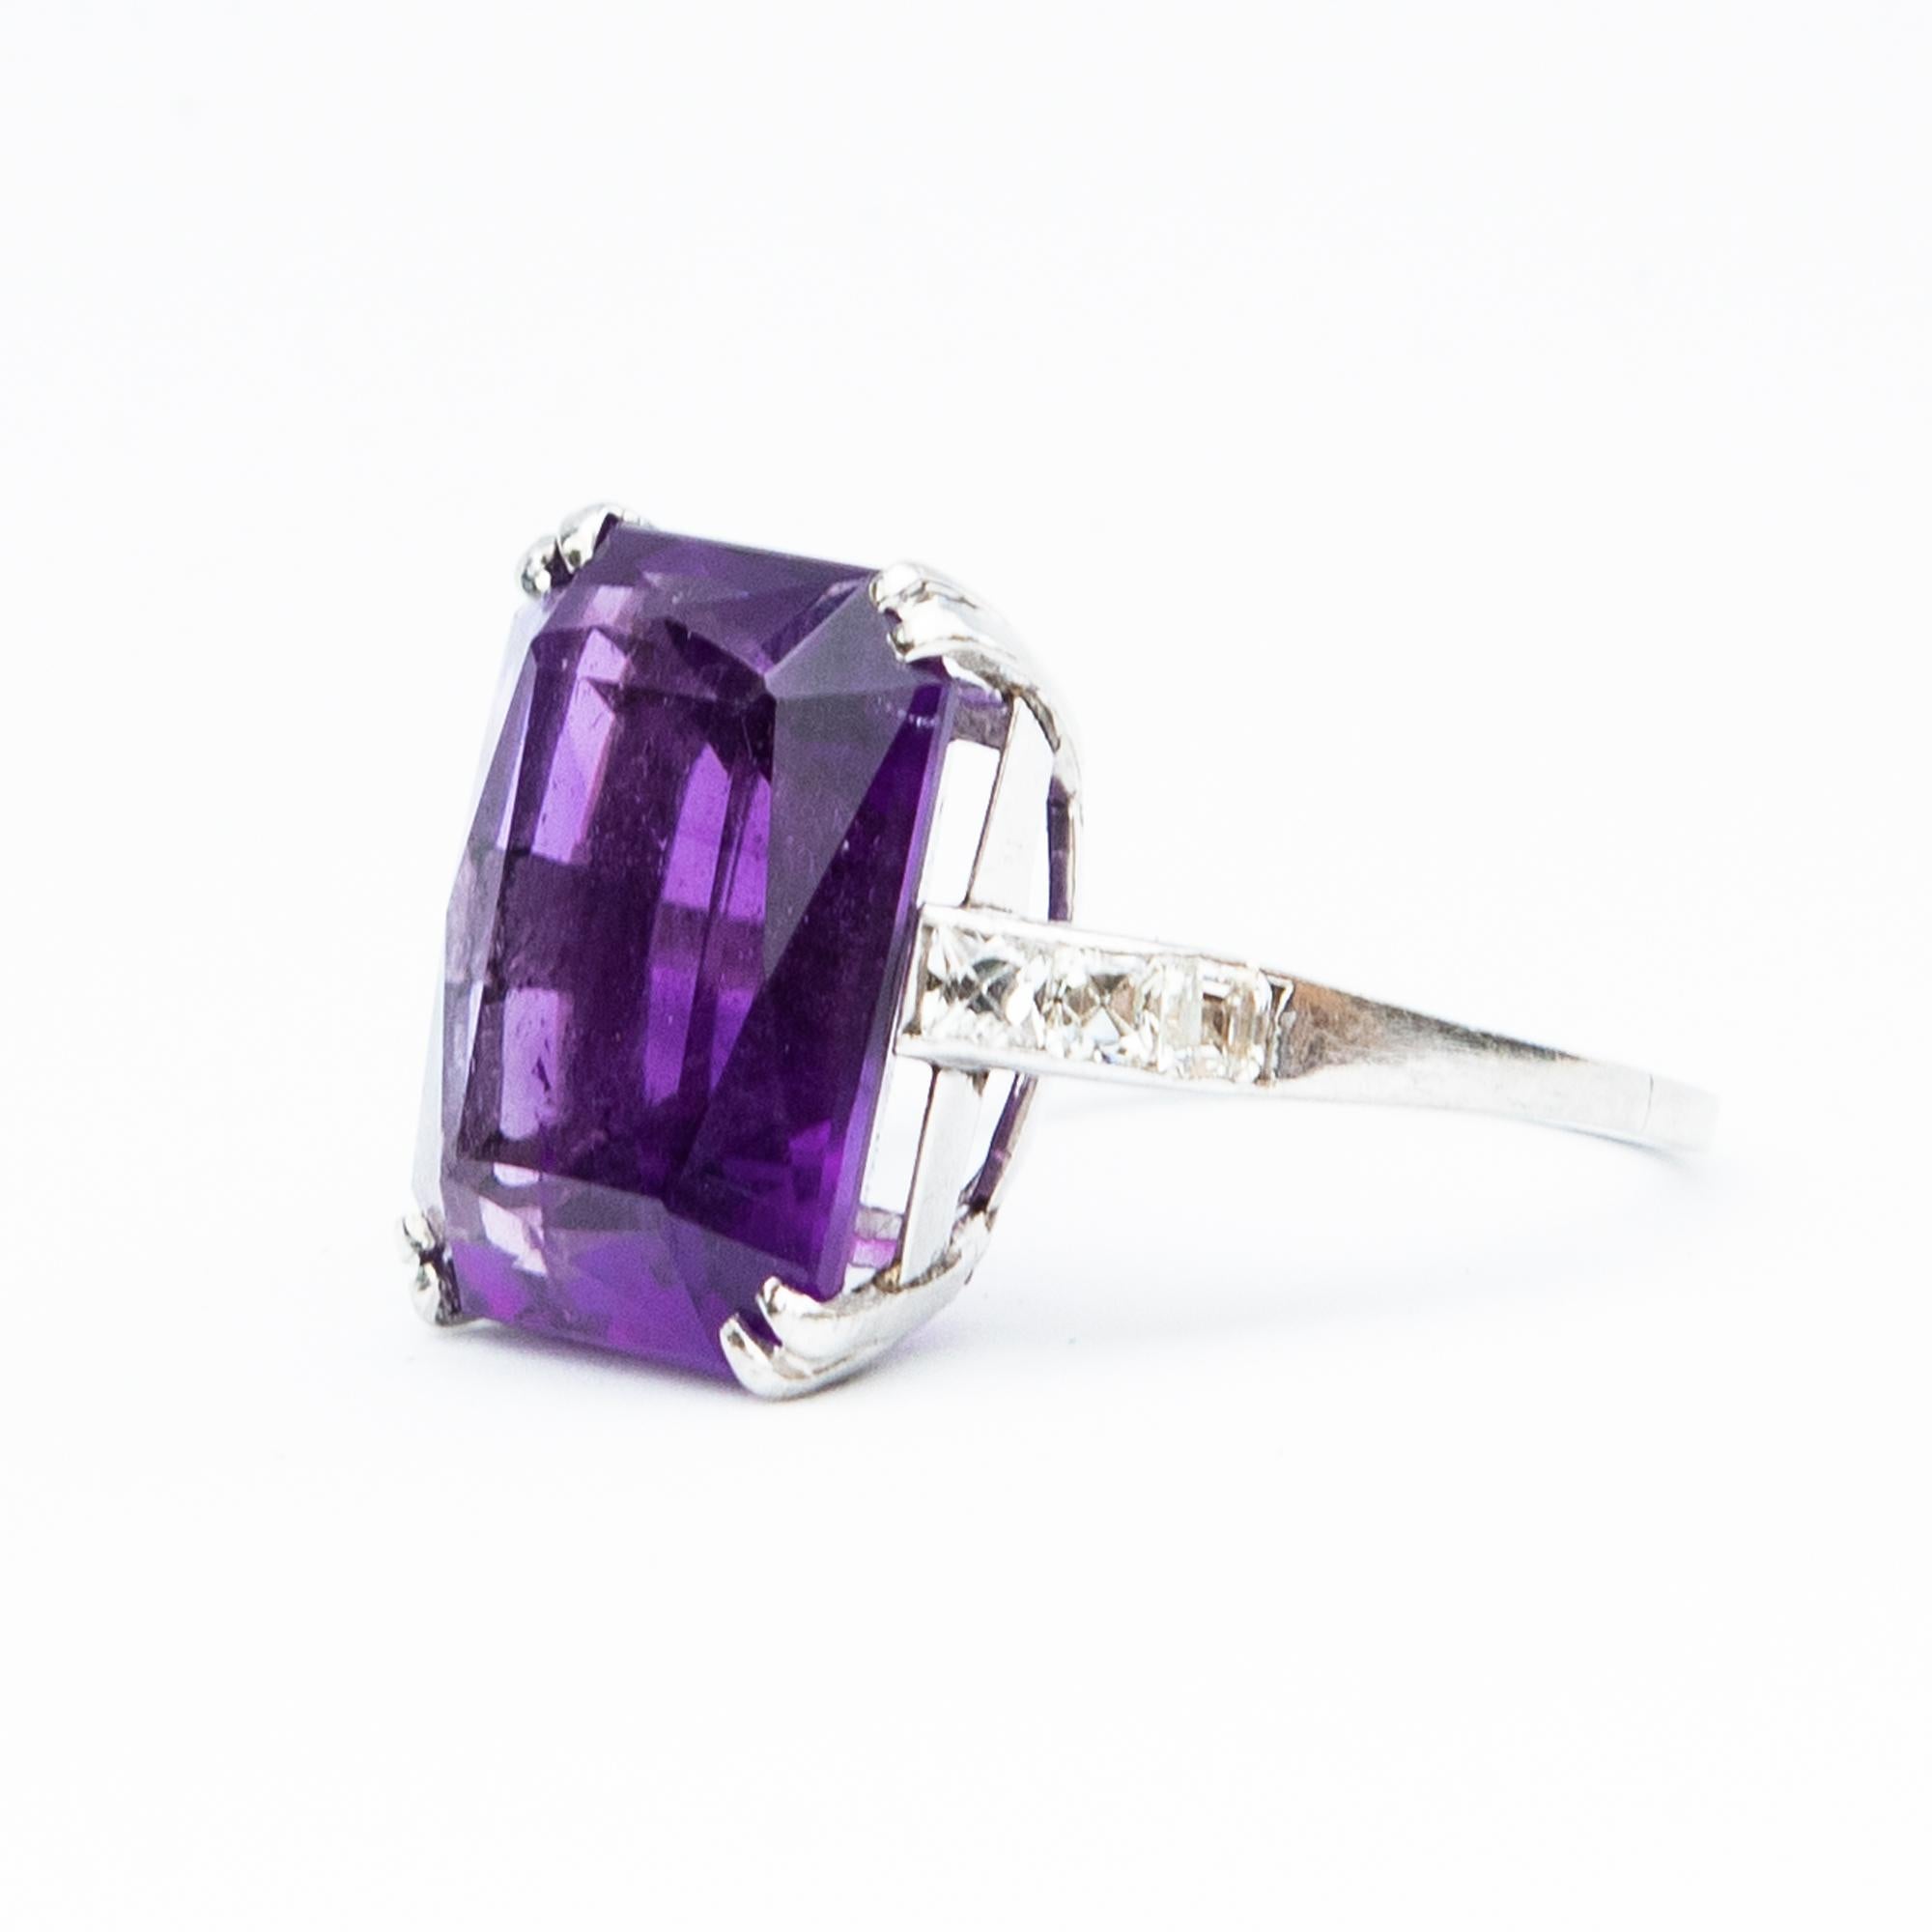 This spectacular Siberian Amethyst measuring just over 13.54 carats is beautifully set in platinum with tapering French Cut diamond shoulders. Total diamond weight certified 48 points, G colour and VS2 clarity.

Head: 17.5 x 13.8 mm 
Ring Size: Q